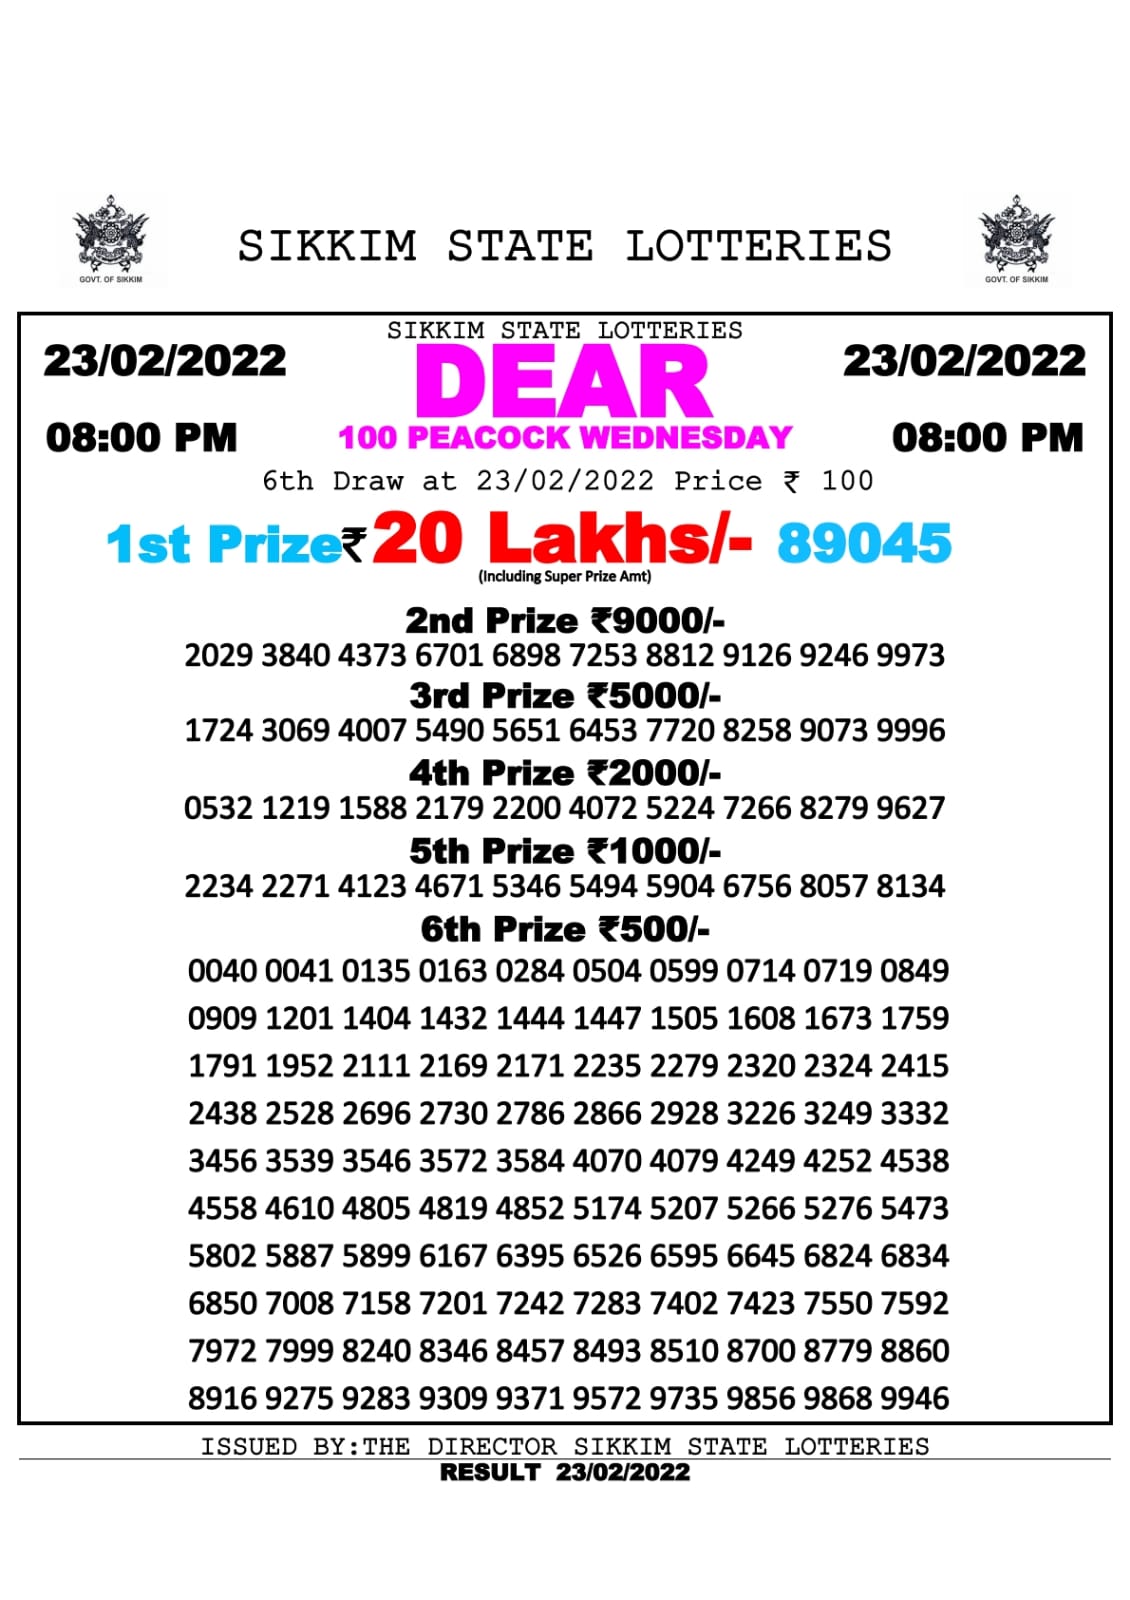 DEAR 100 WEEKLY RESULT 8.00PM 23.02.2022